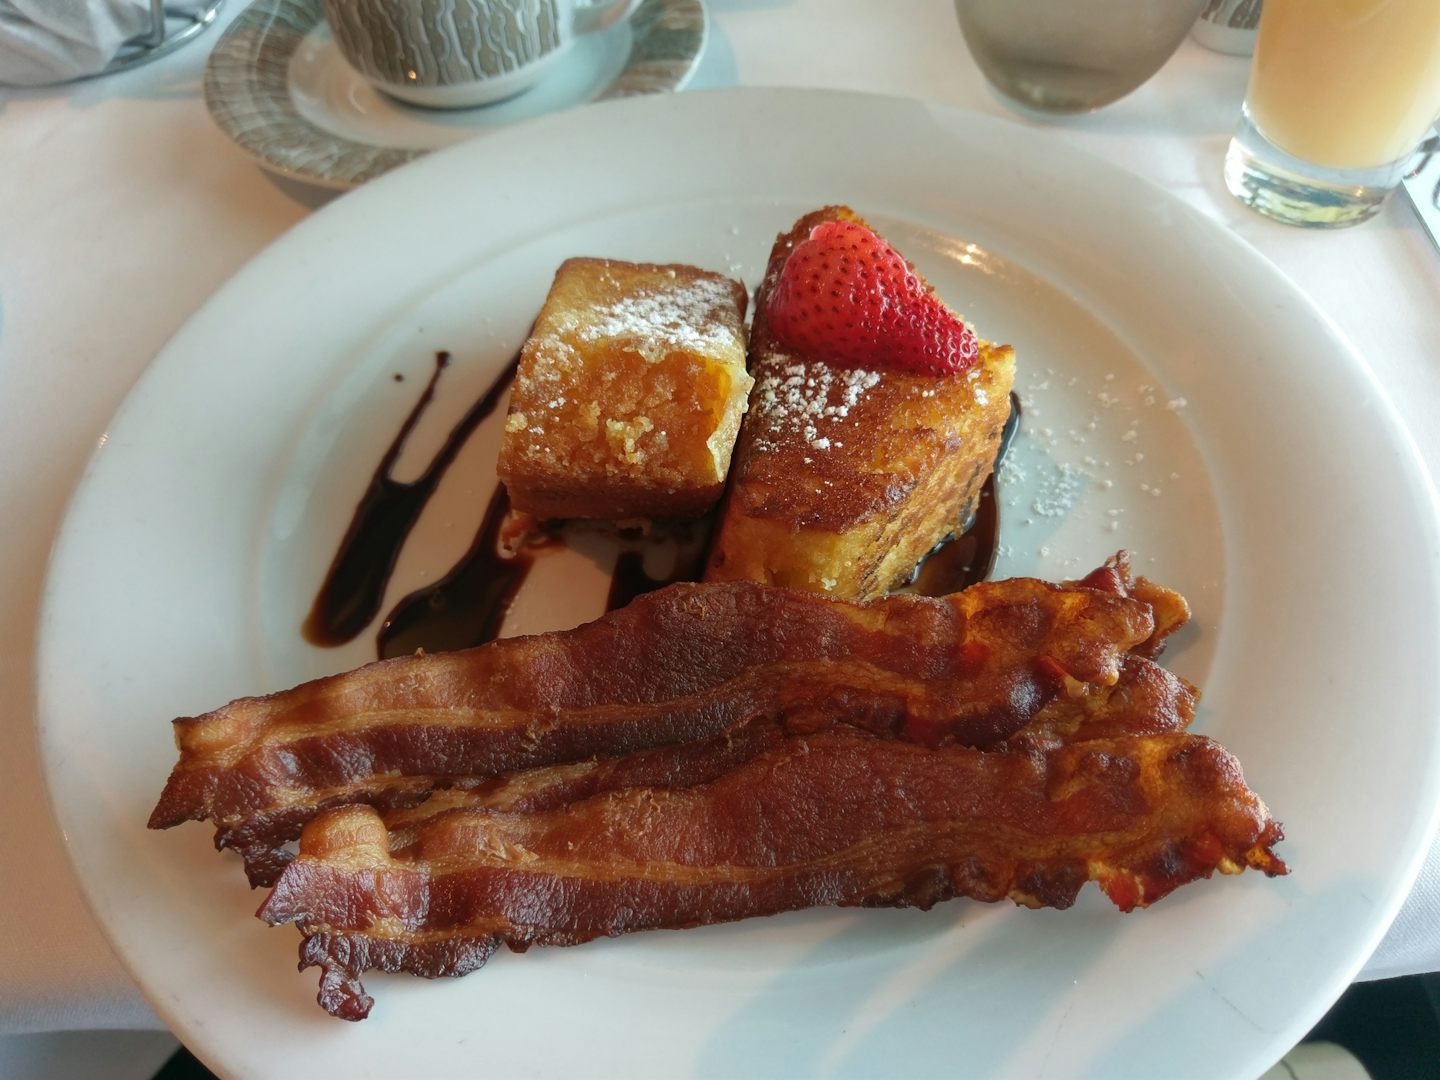 The BEST Breakfast - Pound Cake French Toast at Taste!!